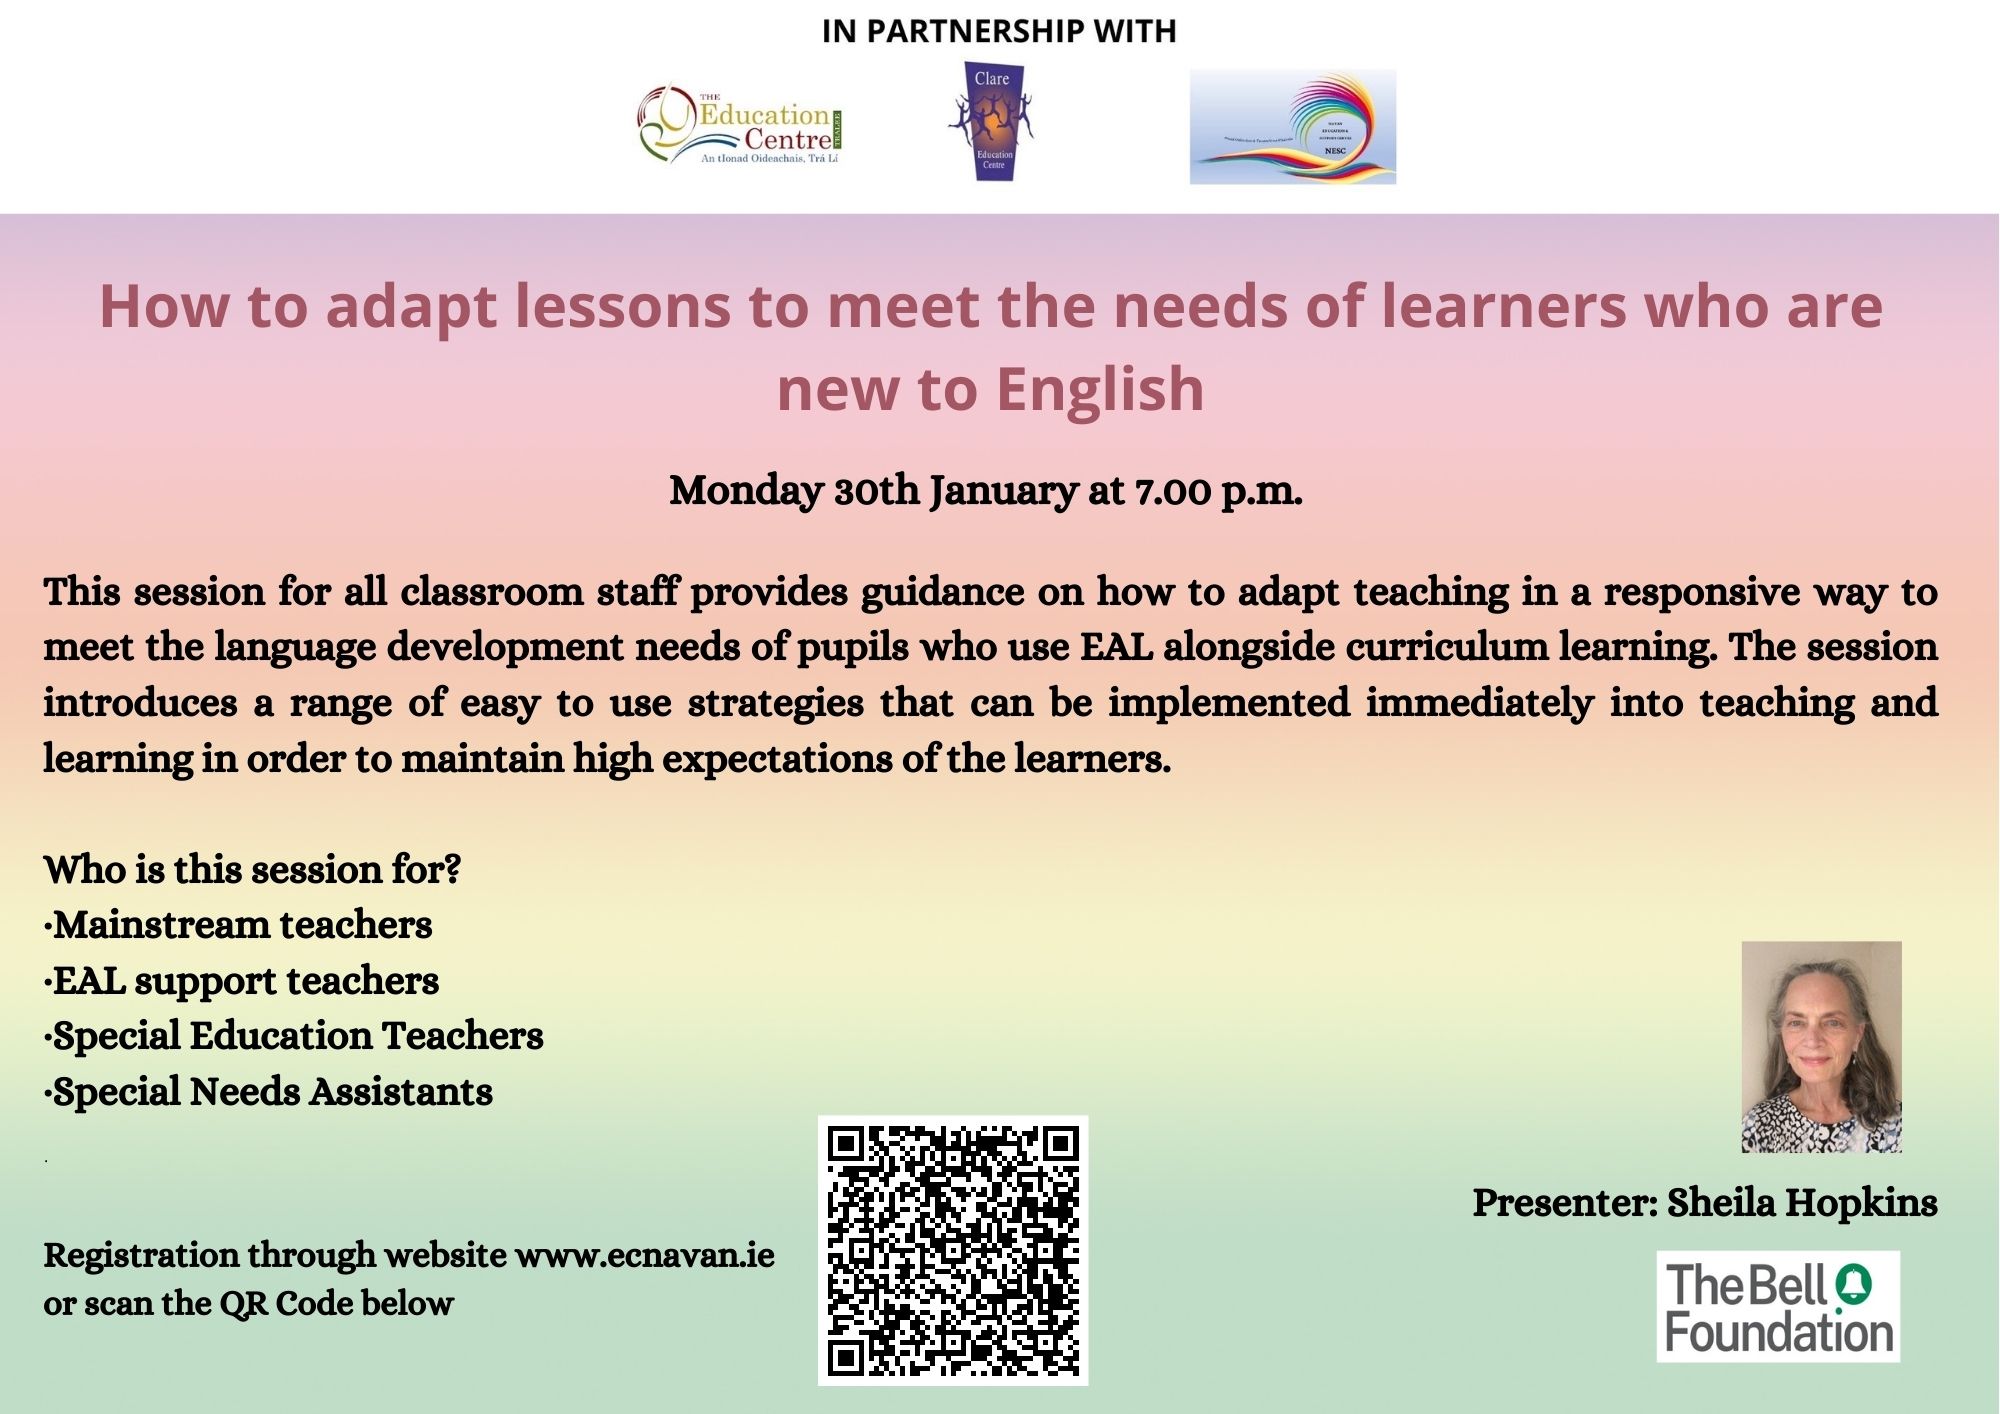 SP23-119 How to adapt lessons to meet the needs of learners who are new to English